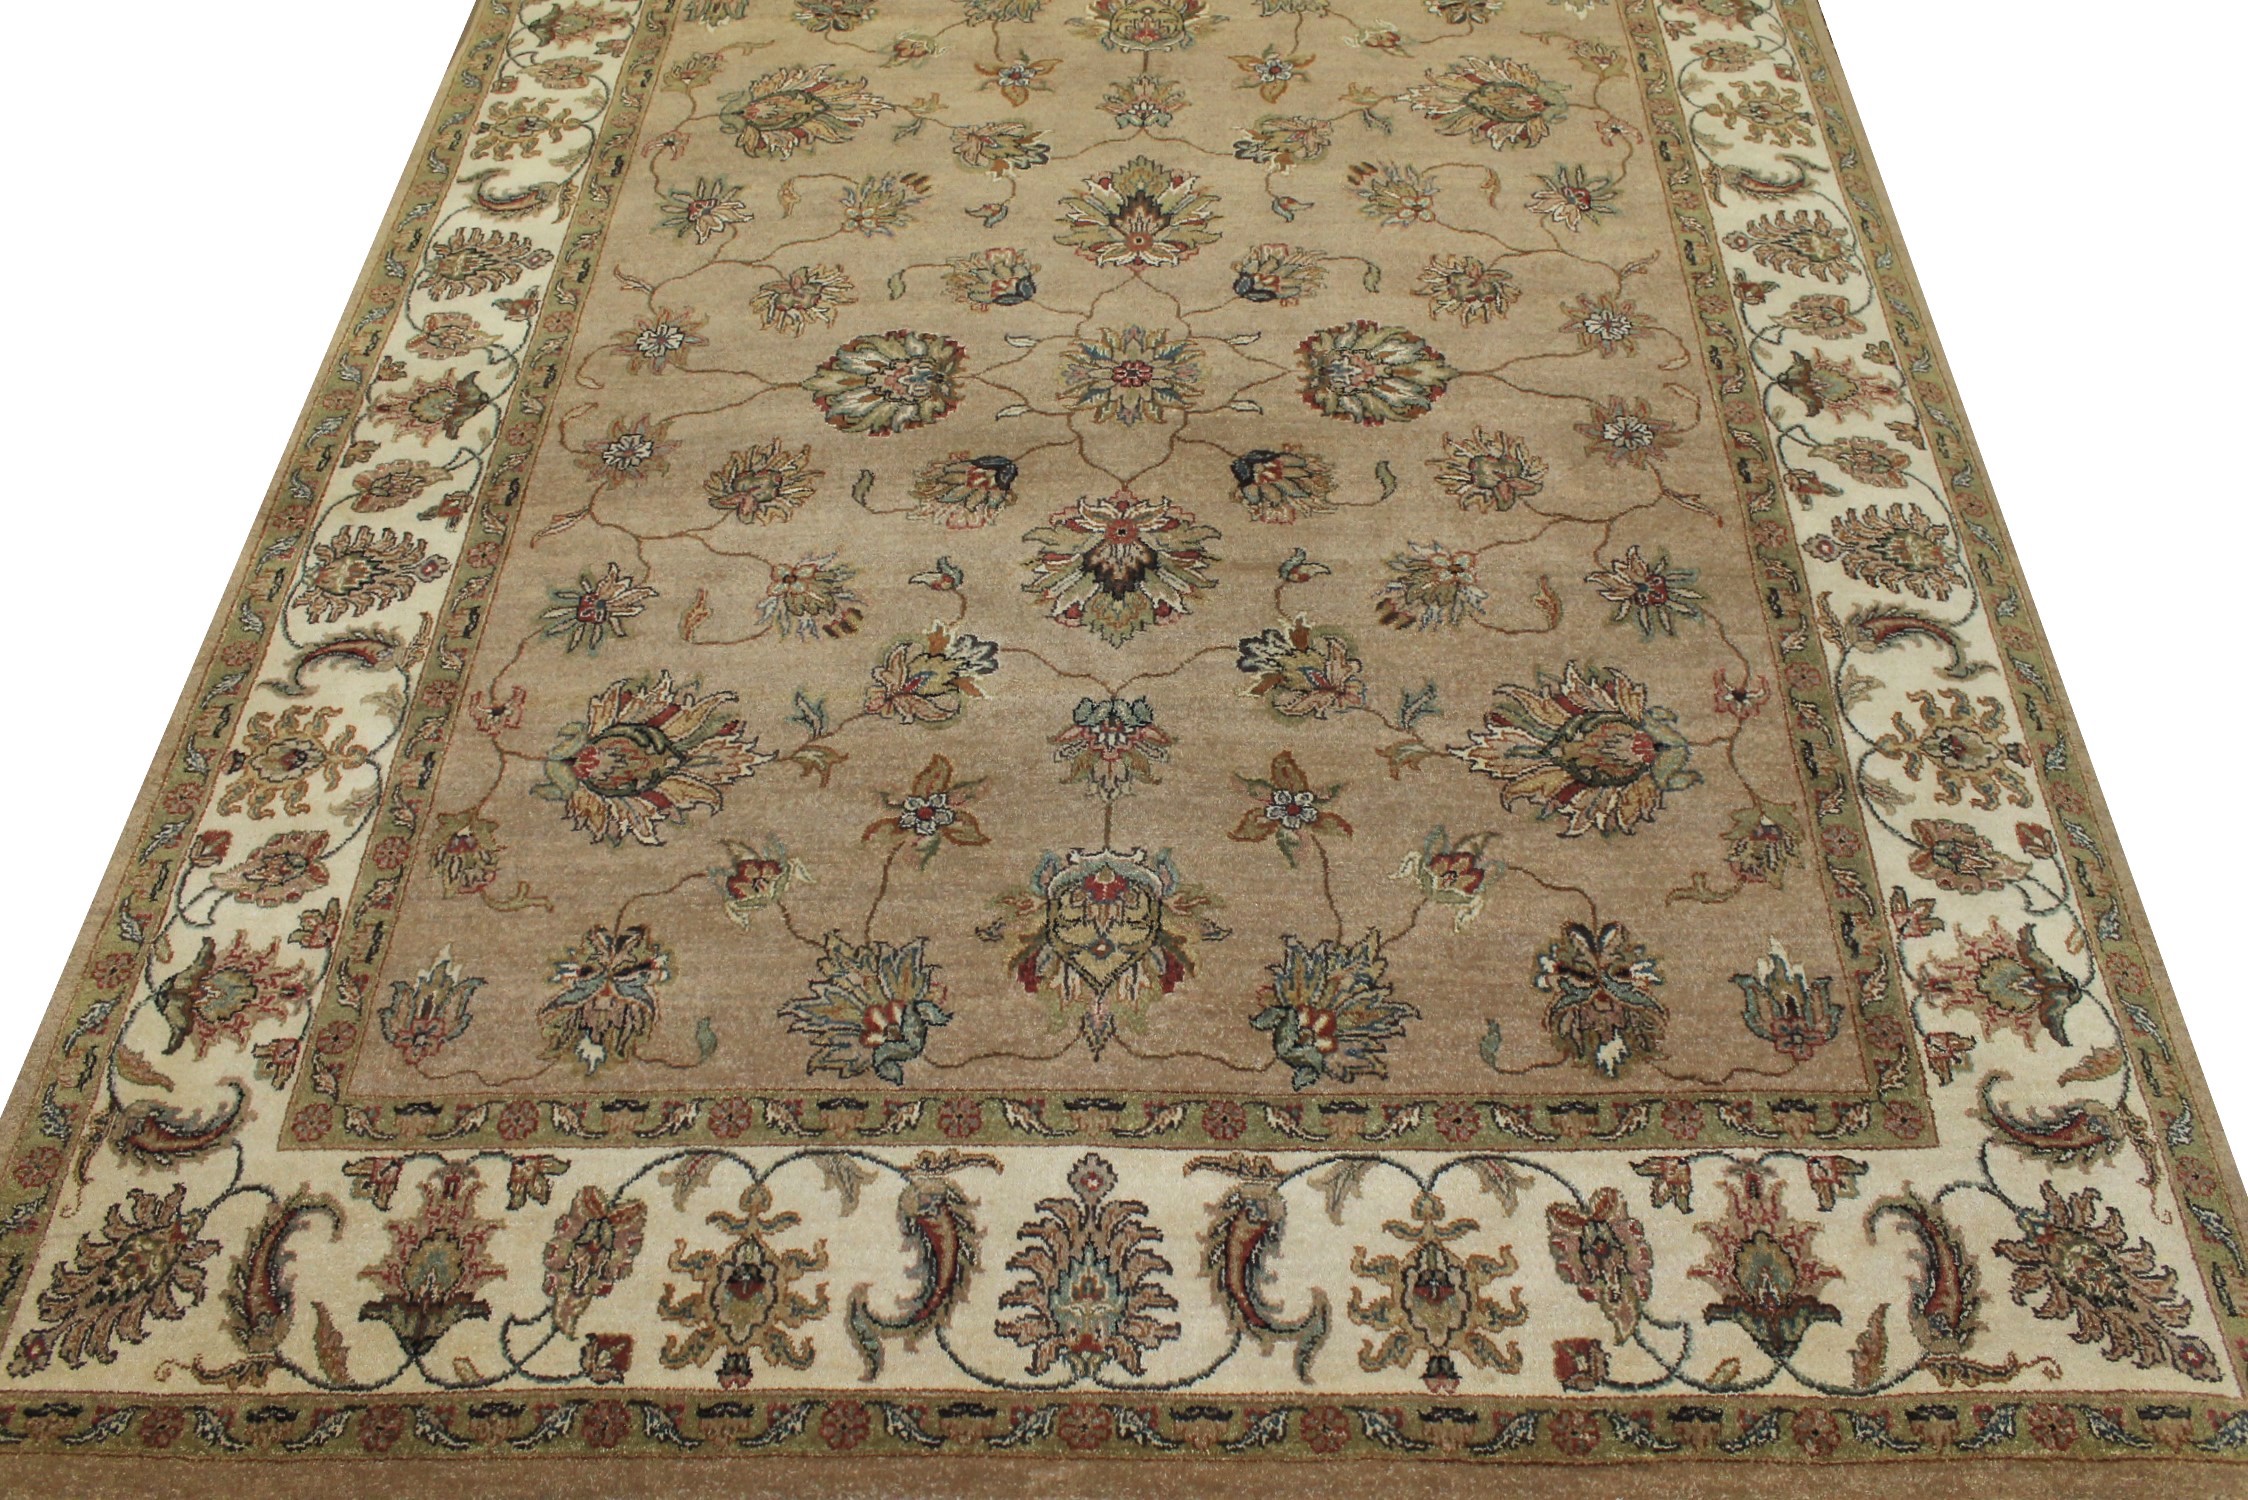 Clearance & Discount Rugs Hand Knotted Wool Rug 7998 Camel - Taupe & Ivory - Beige Hand Knotted Rug